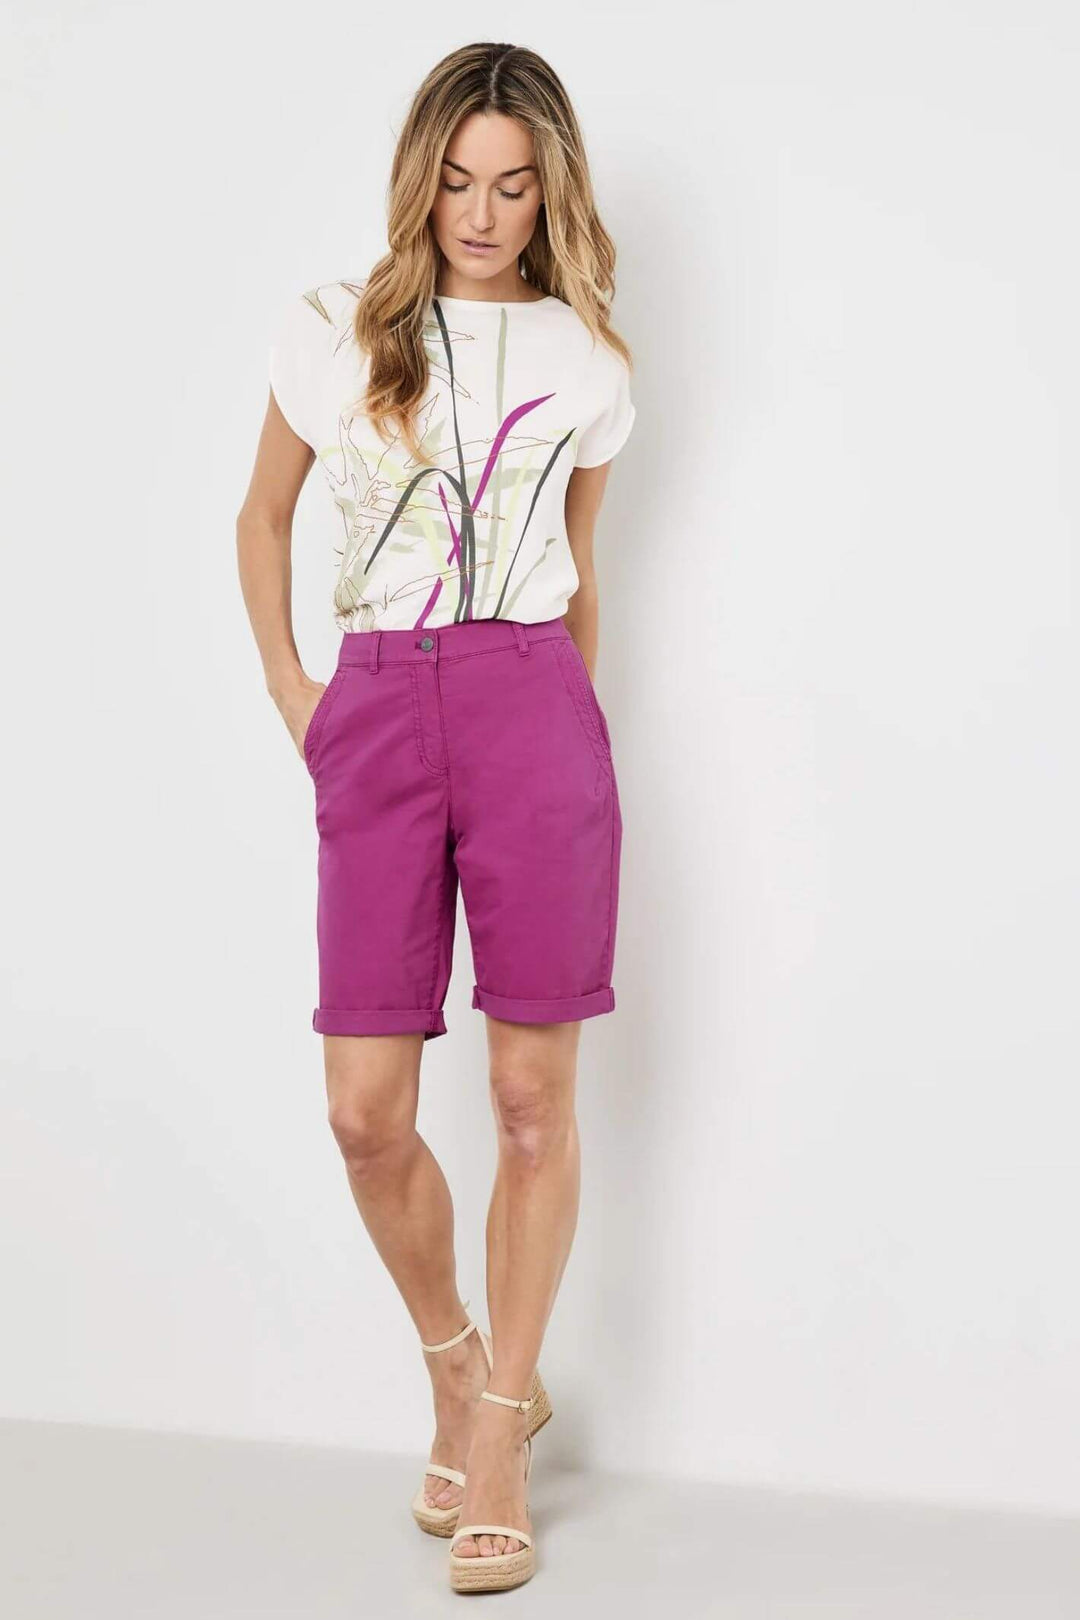 Gerry Weber 822077 Orchid Turn Up Shorts